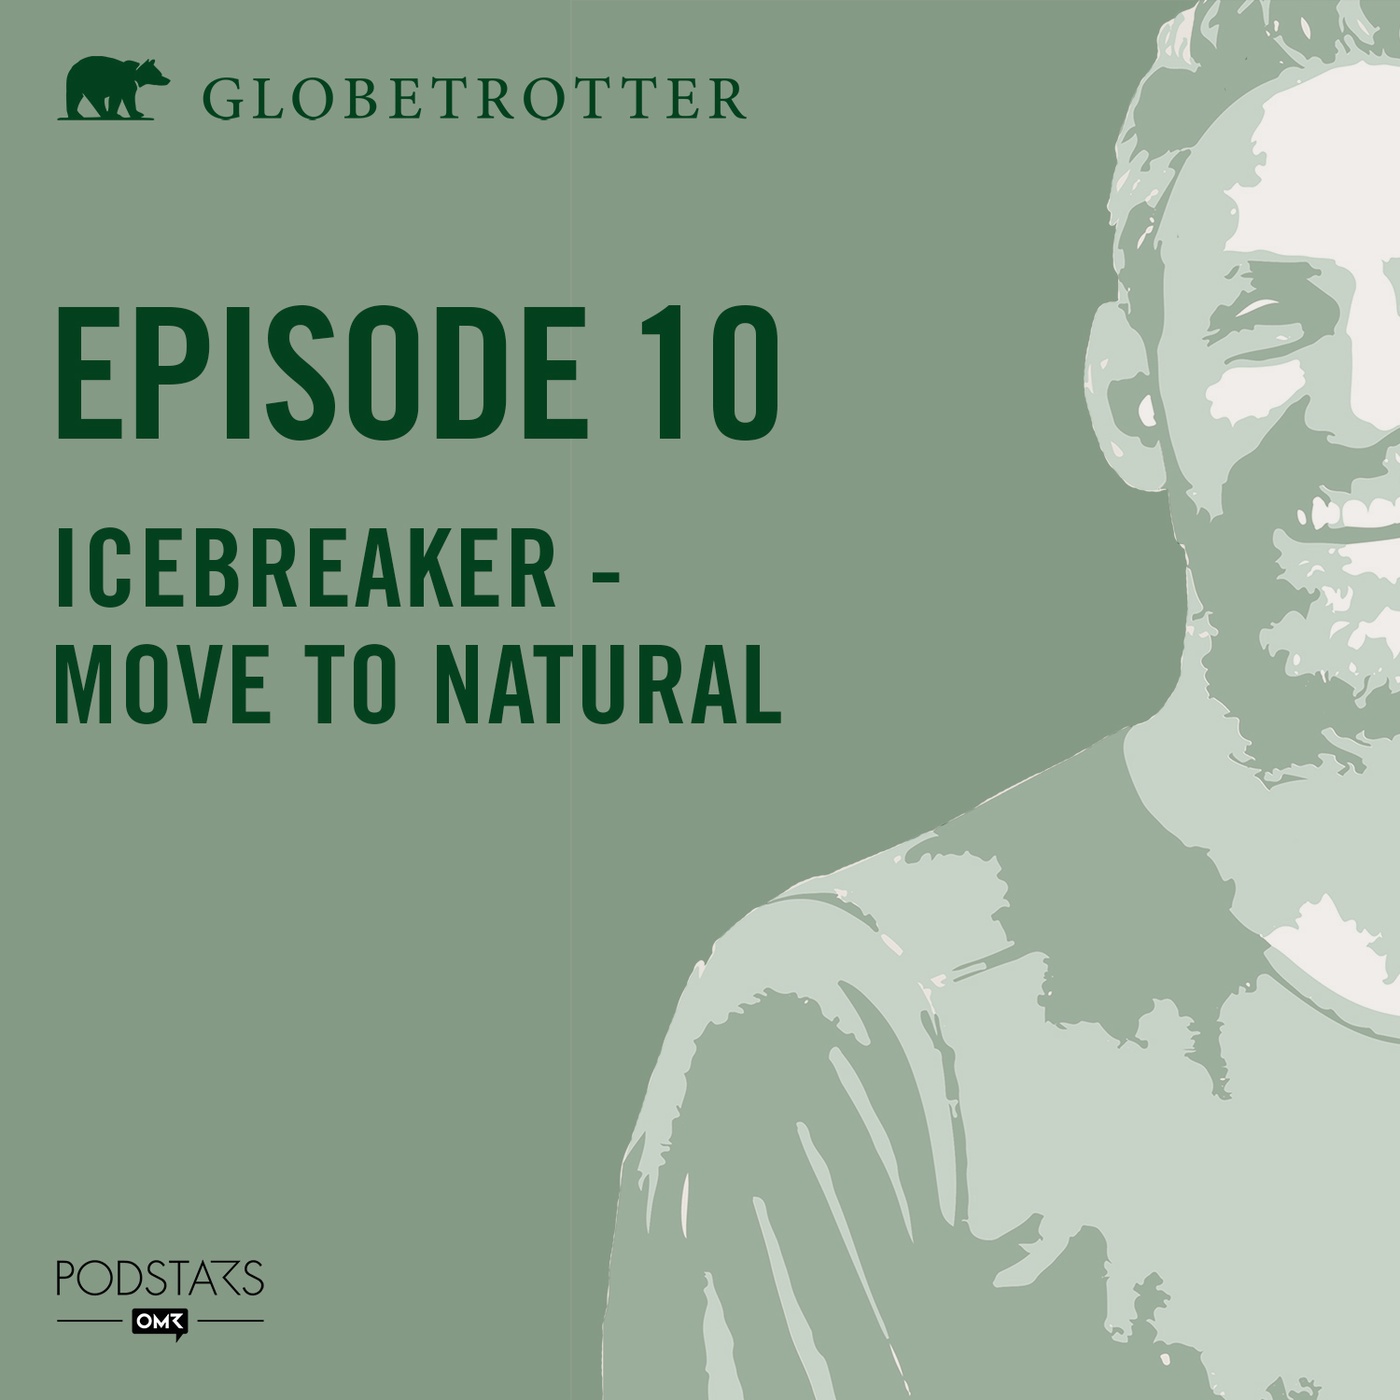 Icebreaker - Move to Natural